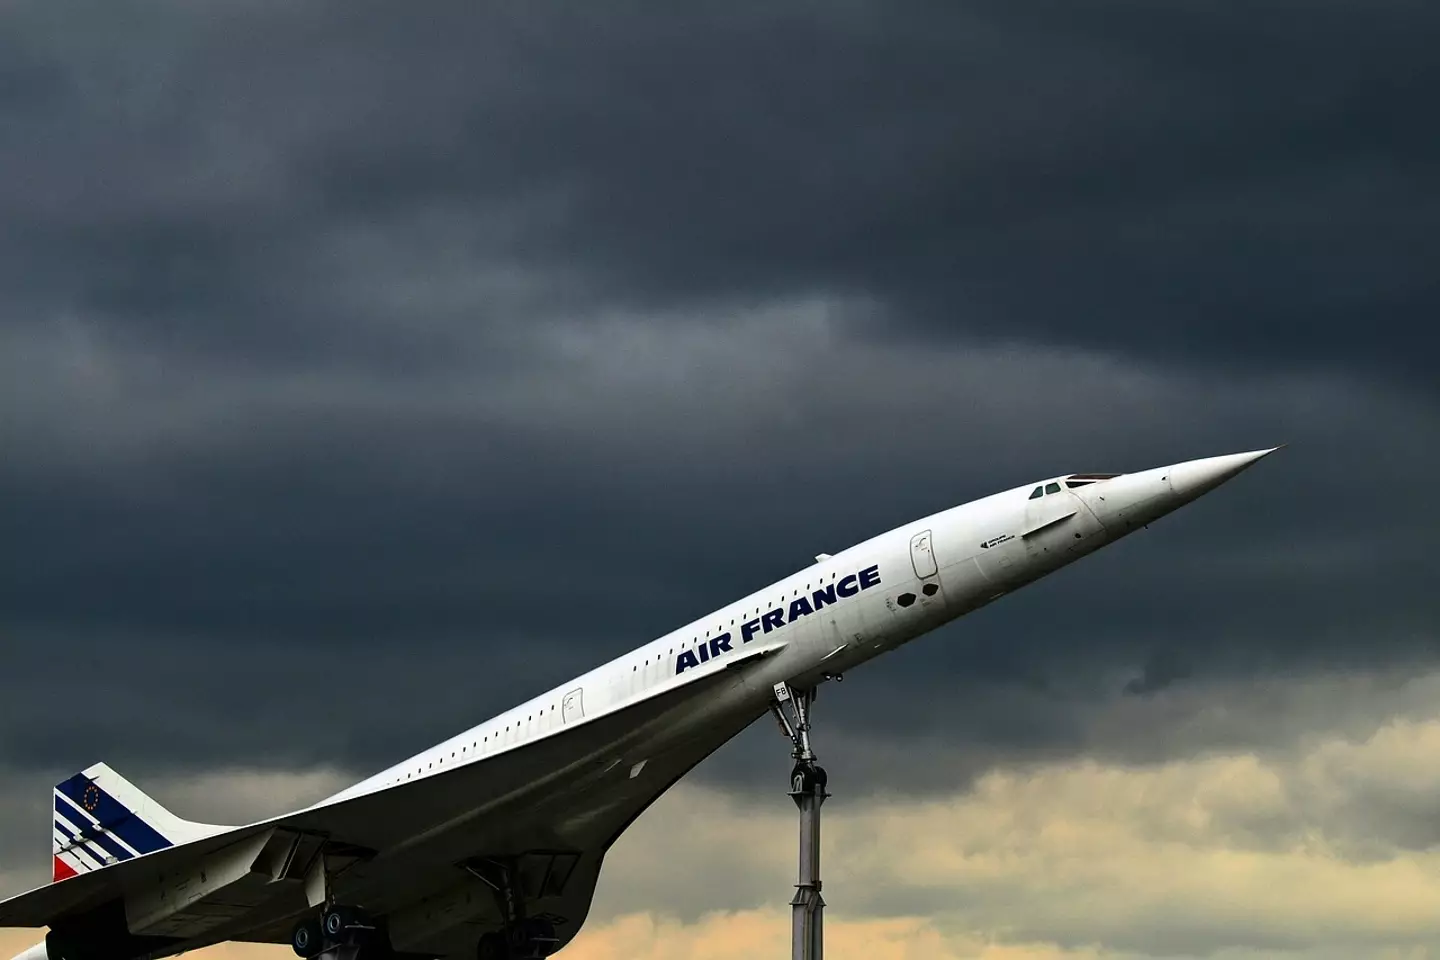 The only time you'll see a Concorde is at a museum.